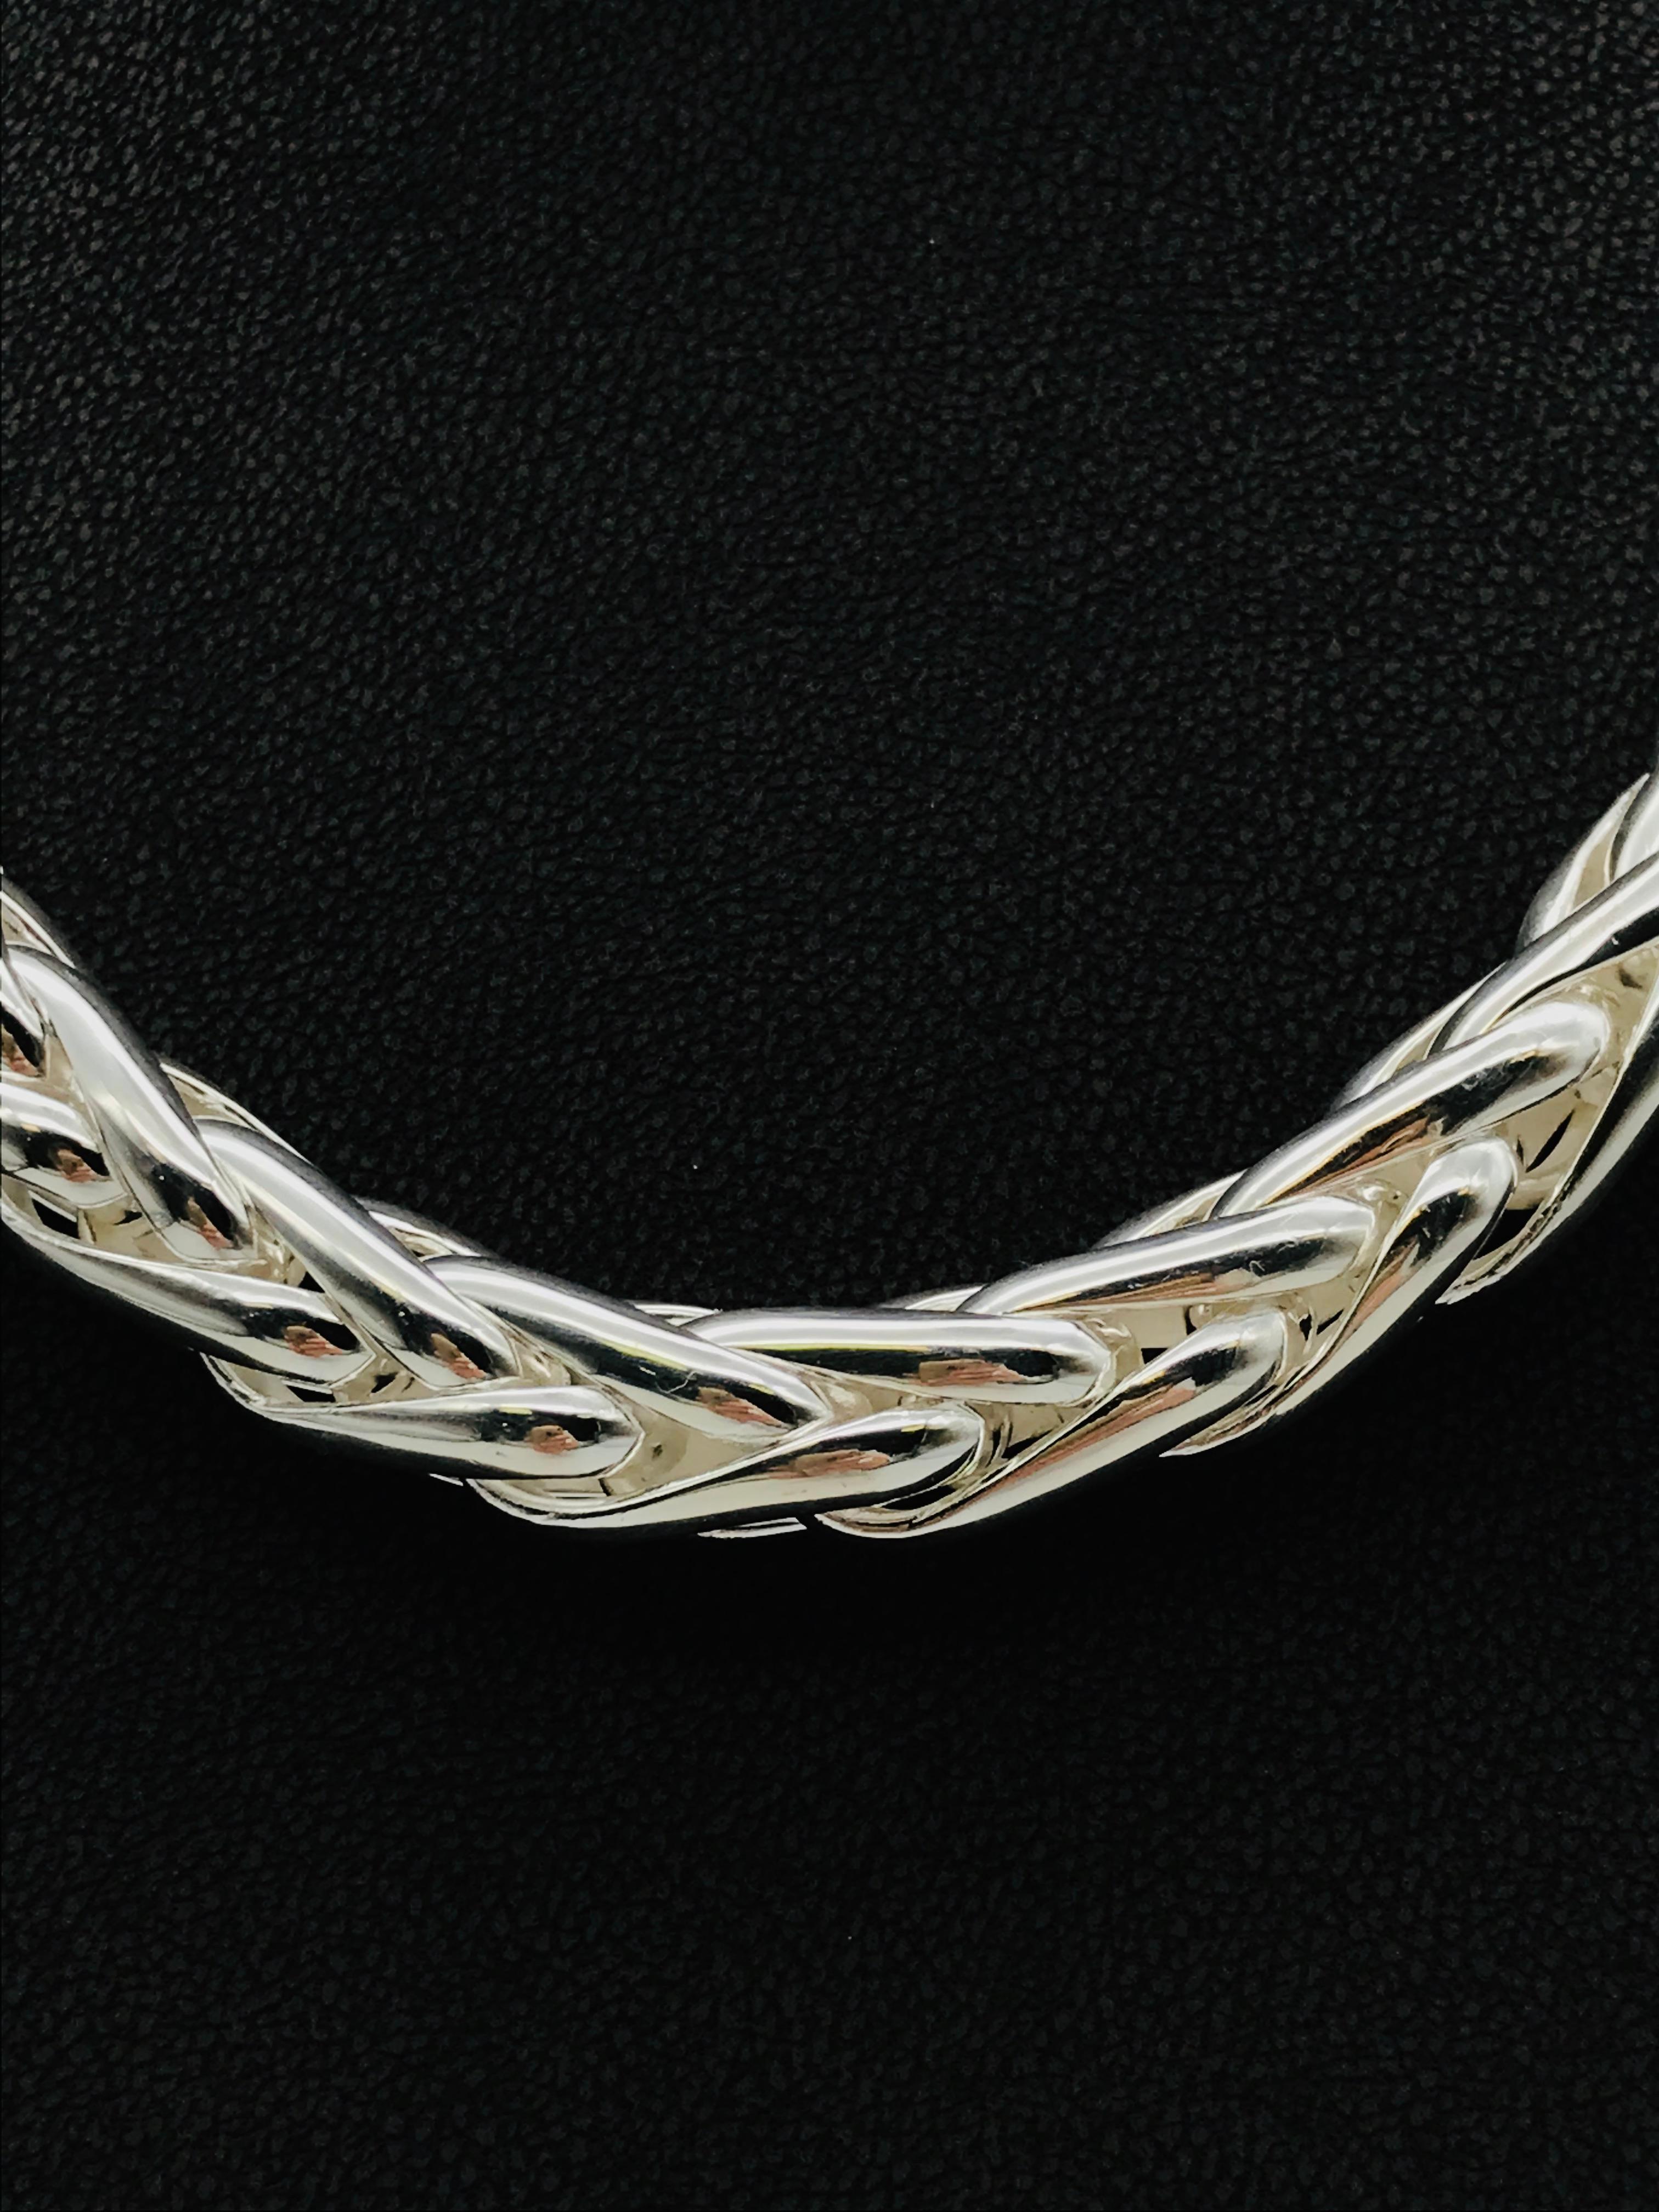 Braided Mesh Silver Necklace
Solid Lobster clasp
Weight of Silver : 214 gr 
